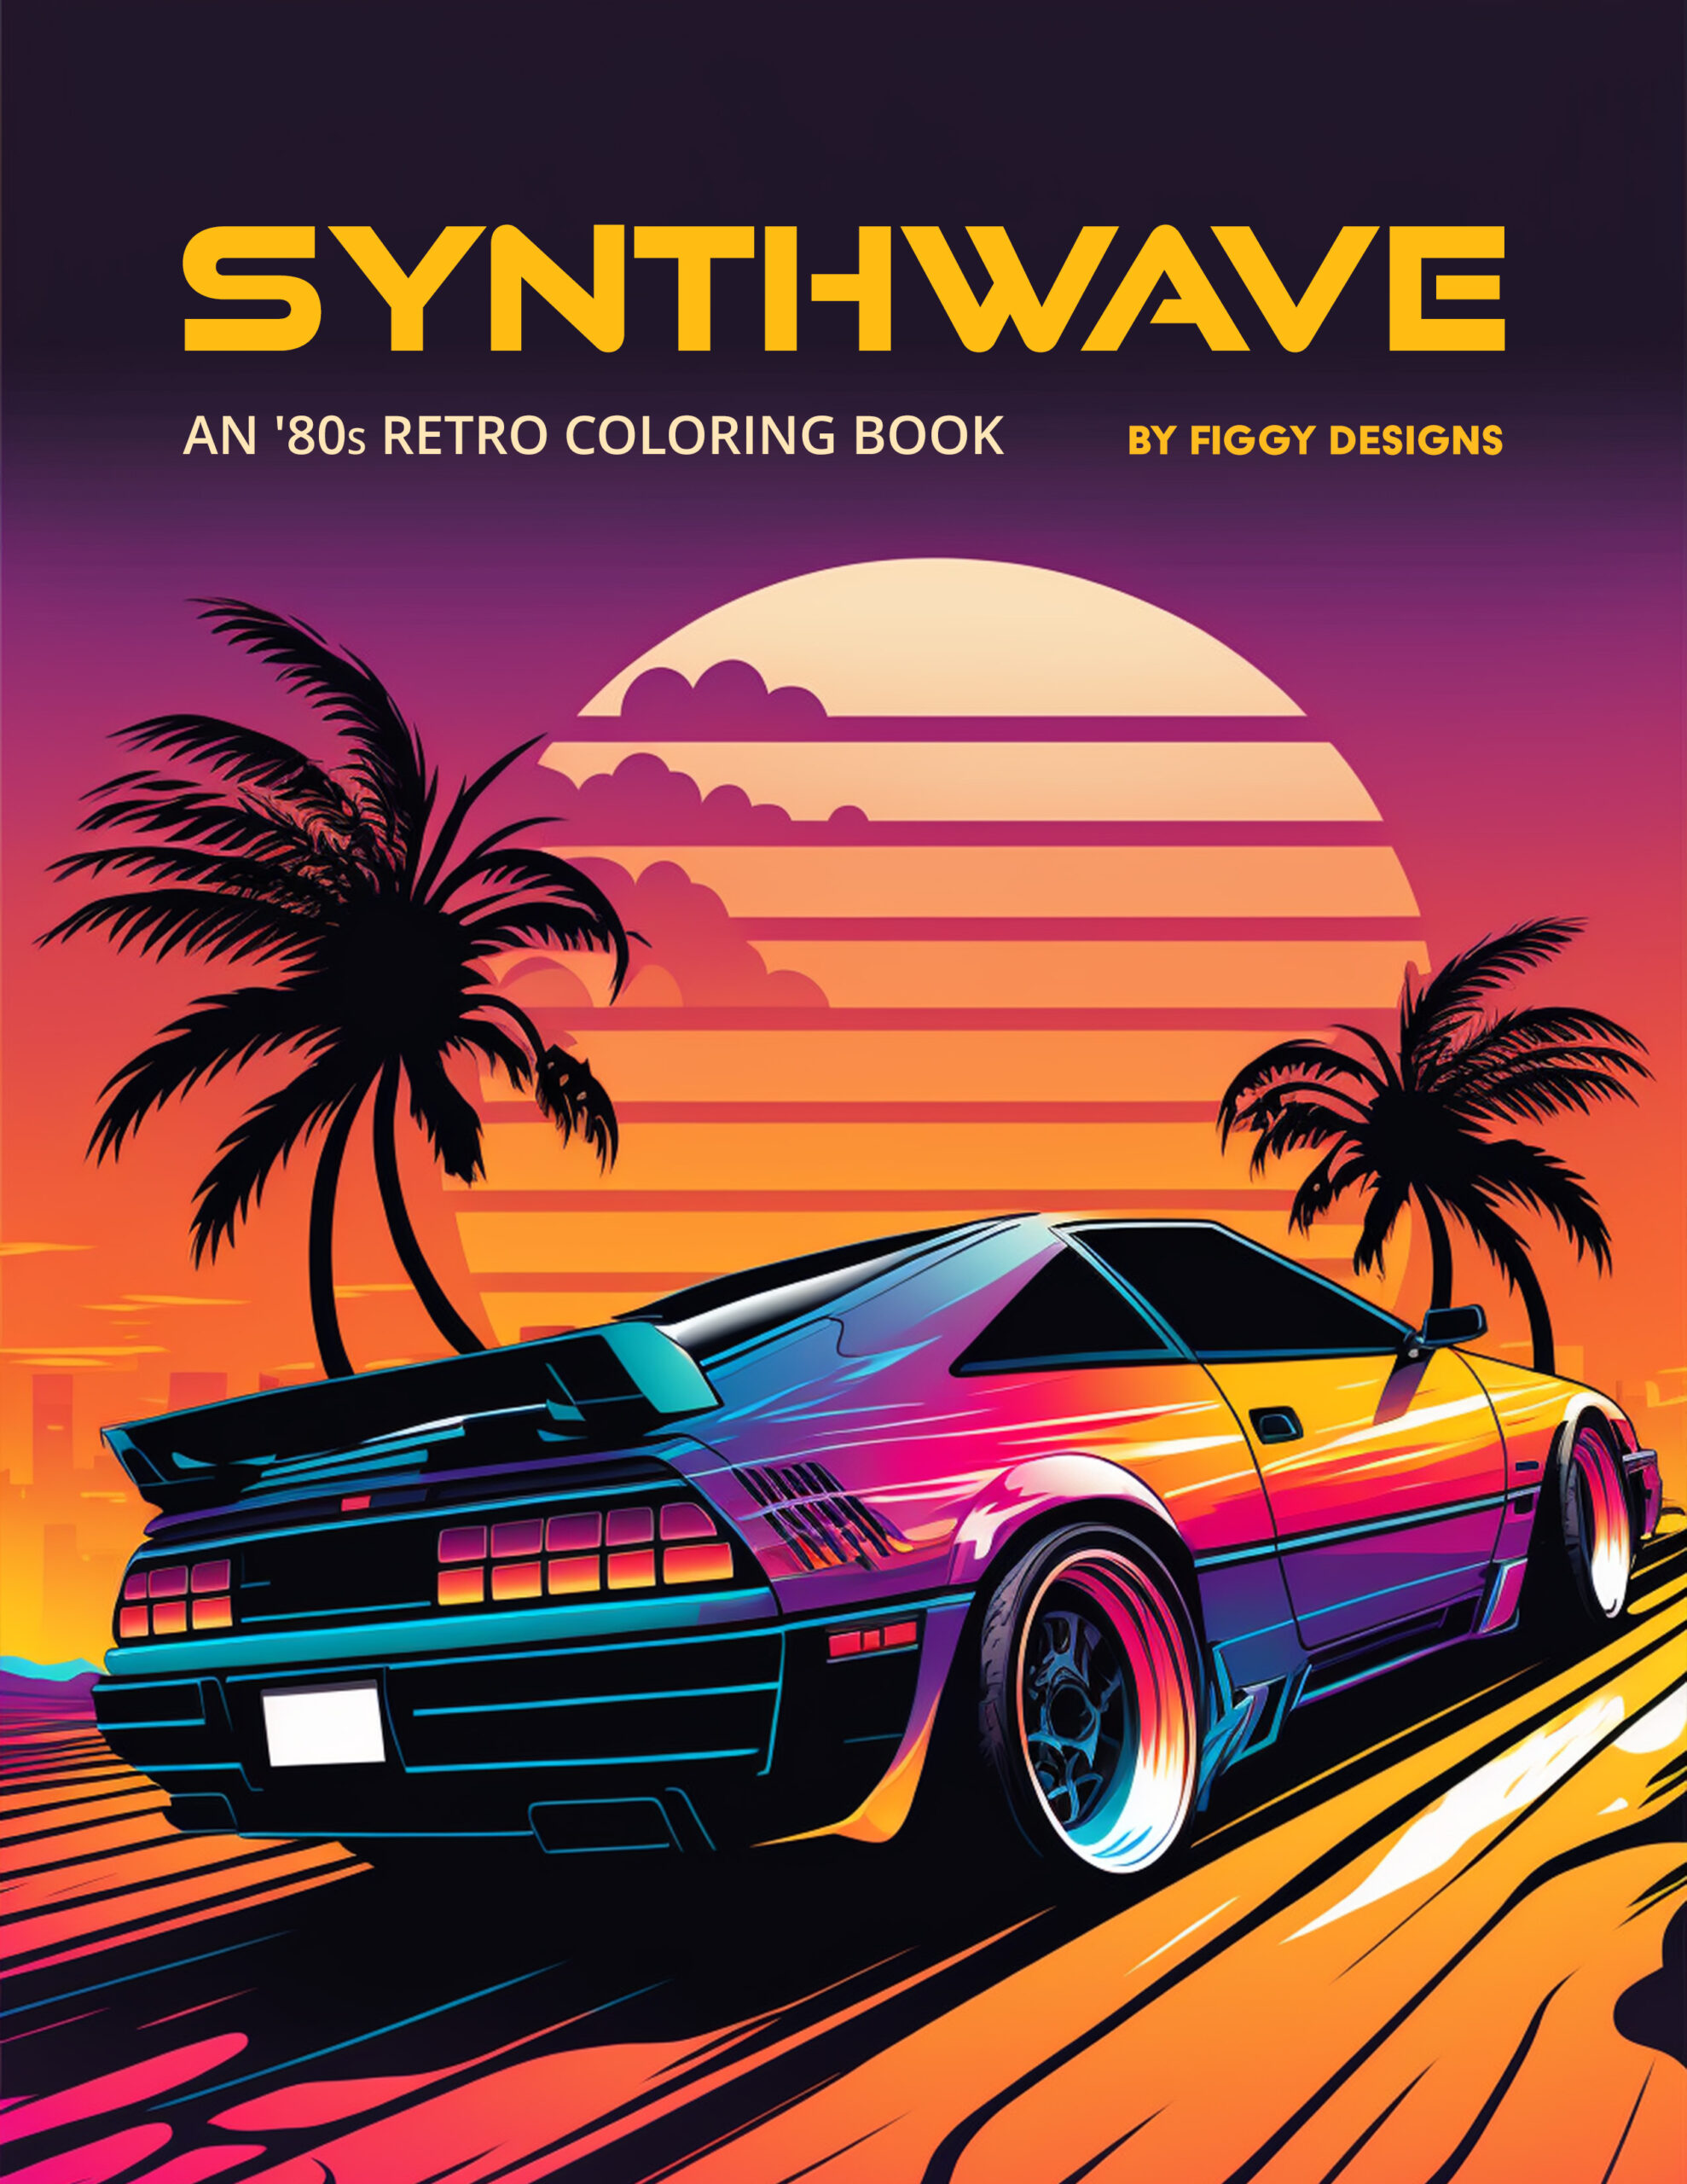 Synthwave: An 80s Retro Coloring Book